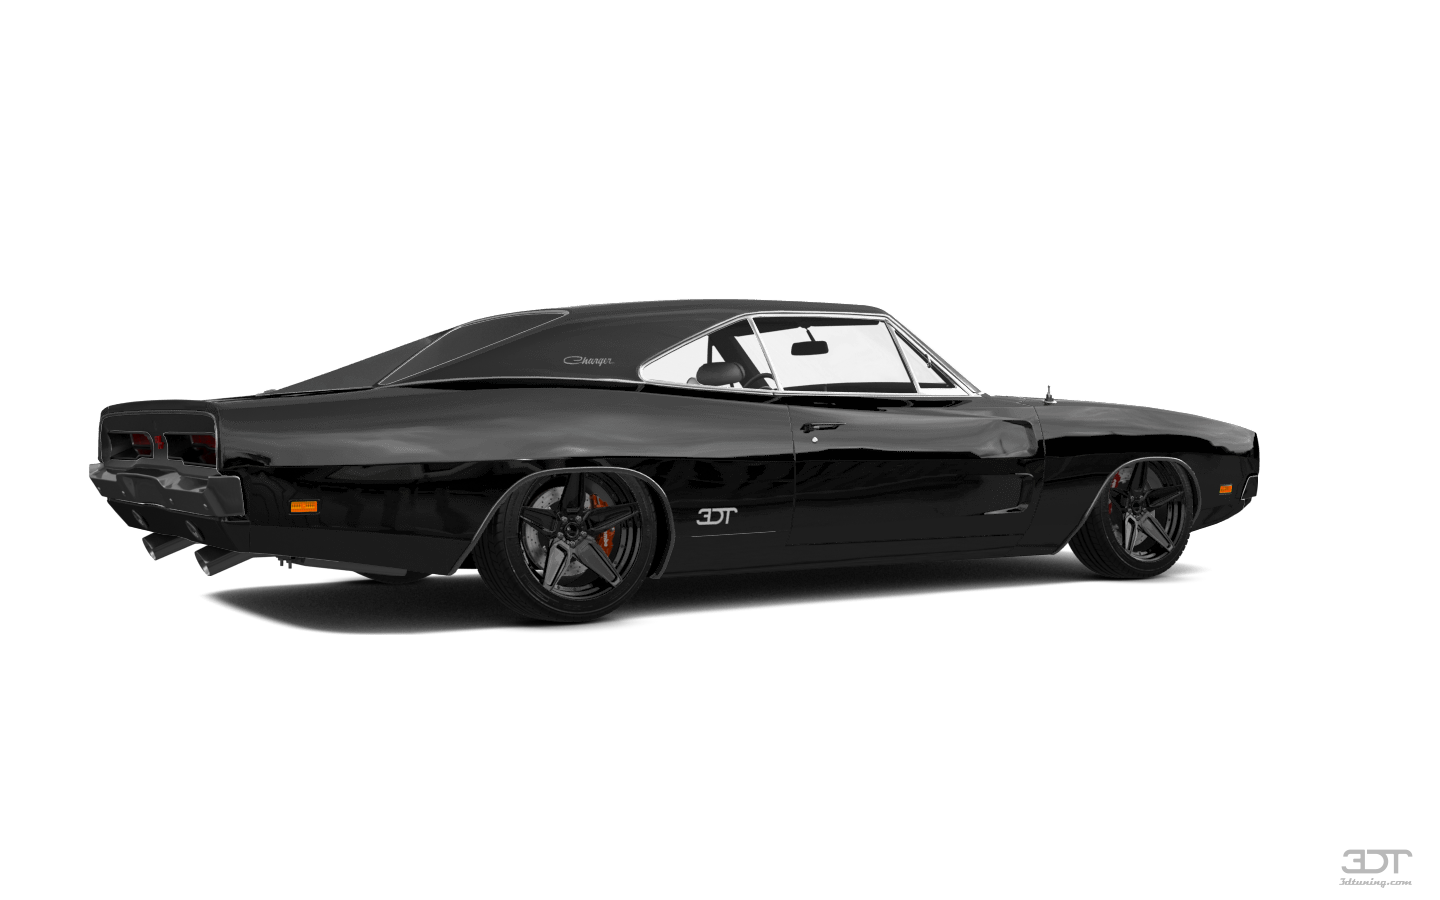 Dodge Charger 2 Door Coupe 1969 tuning